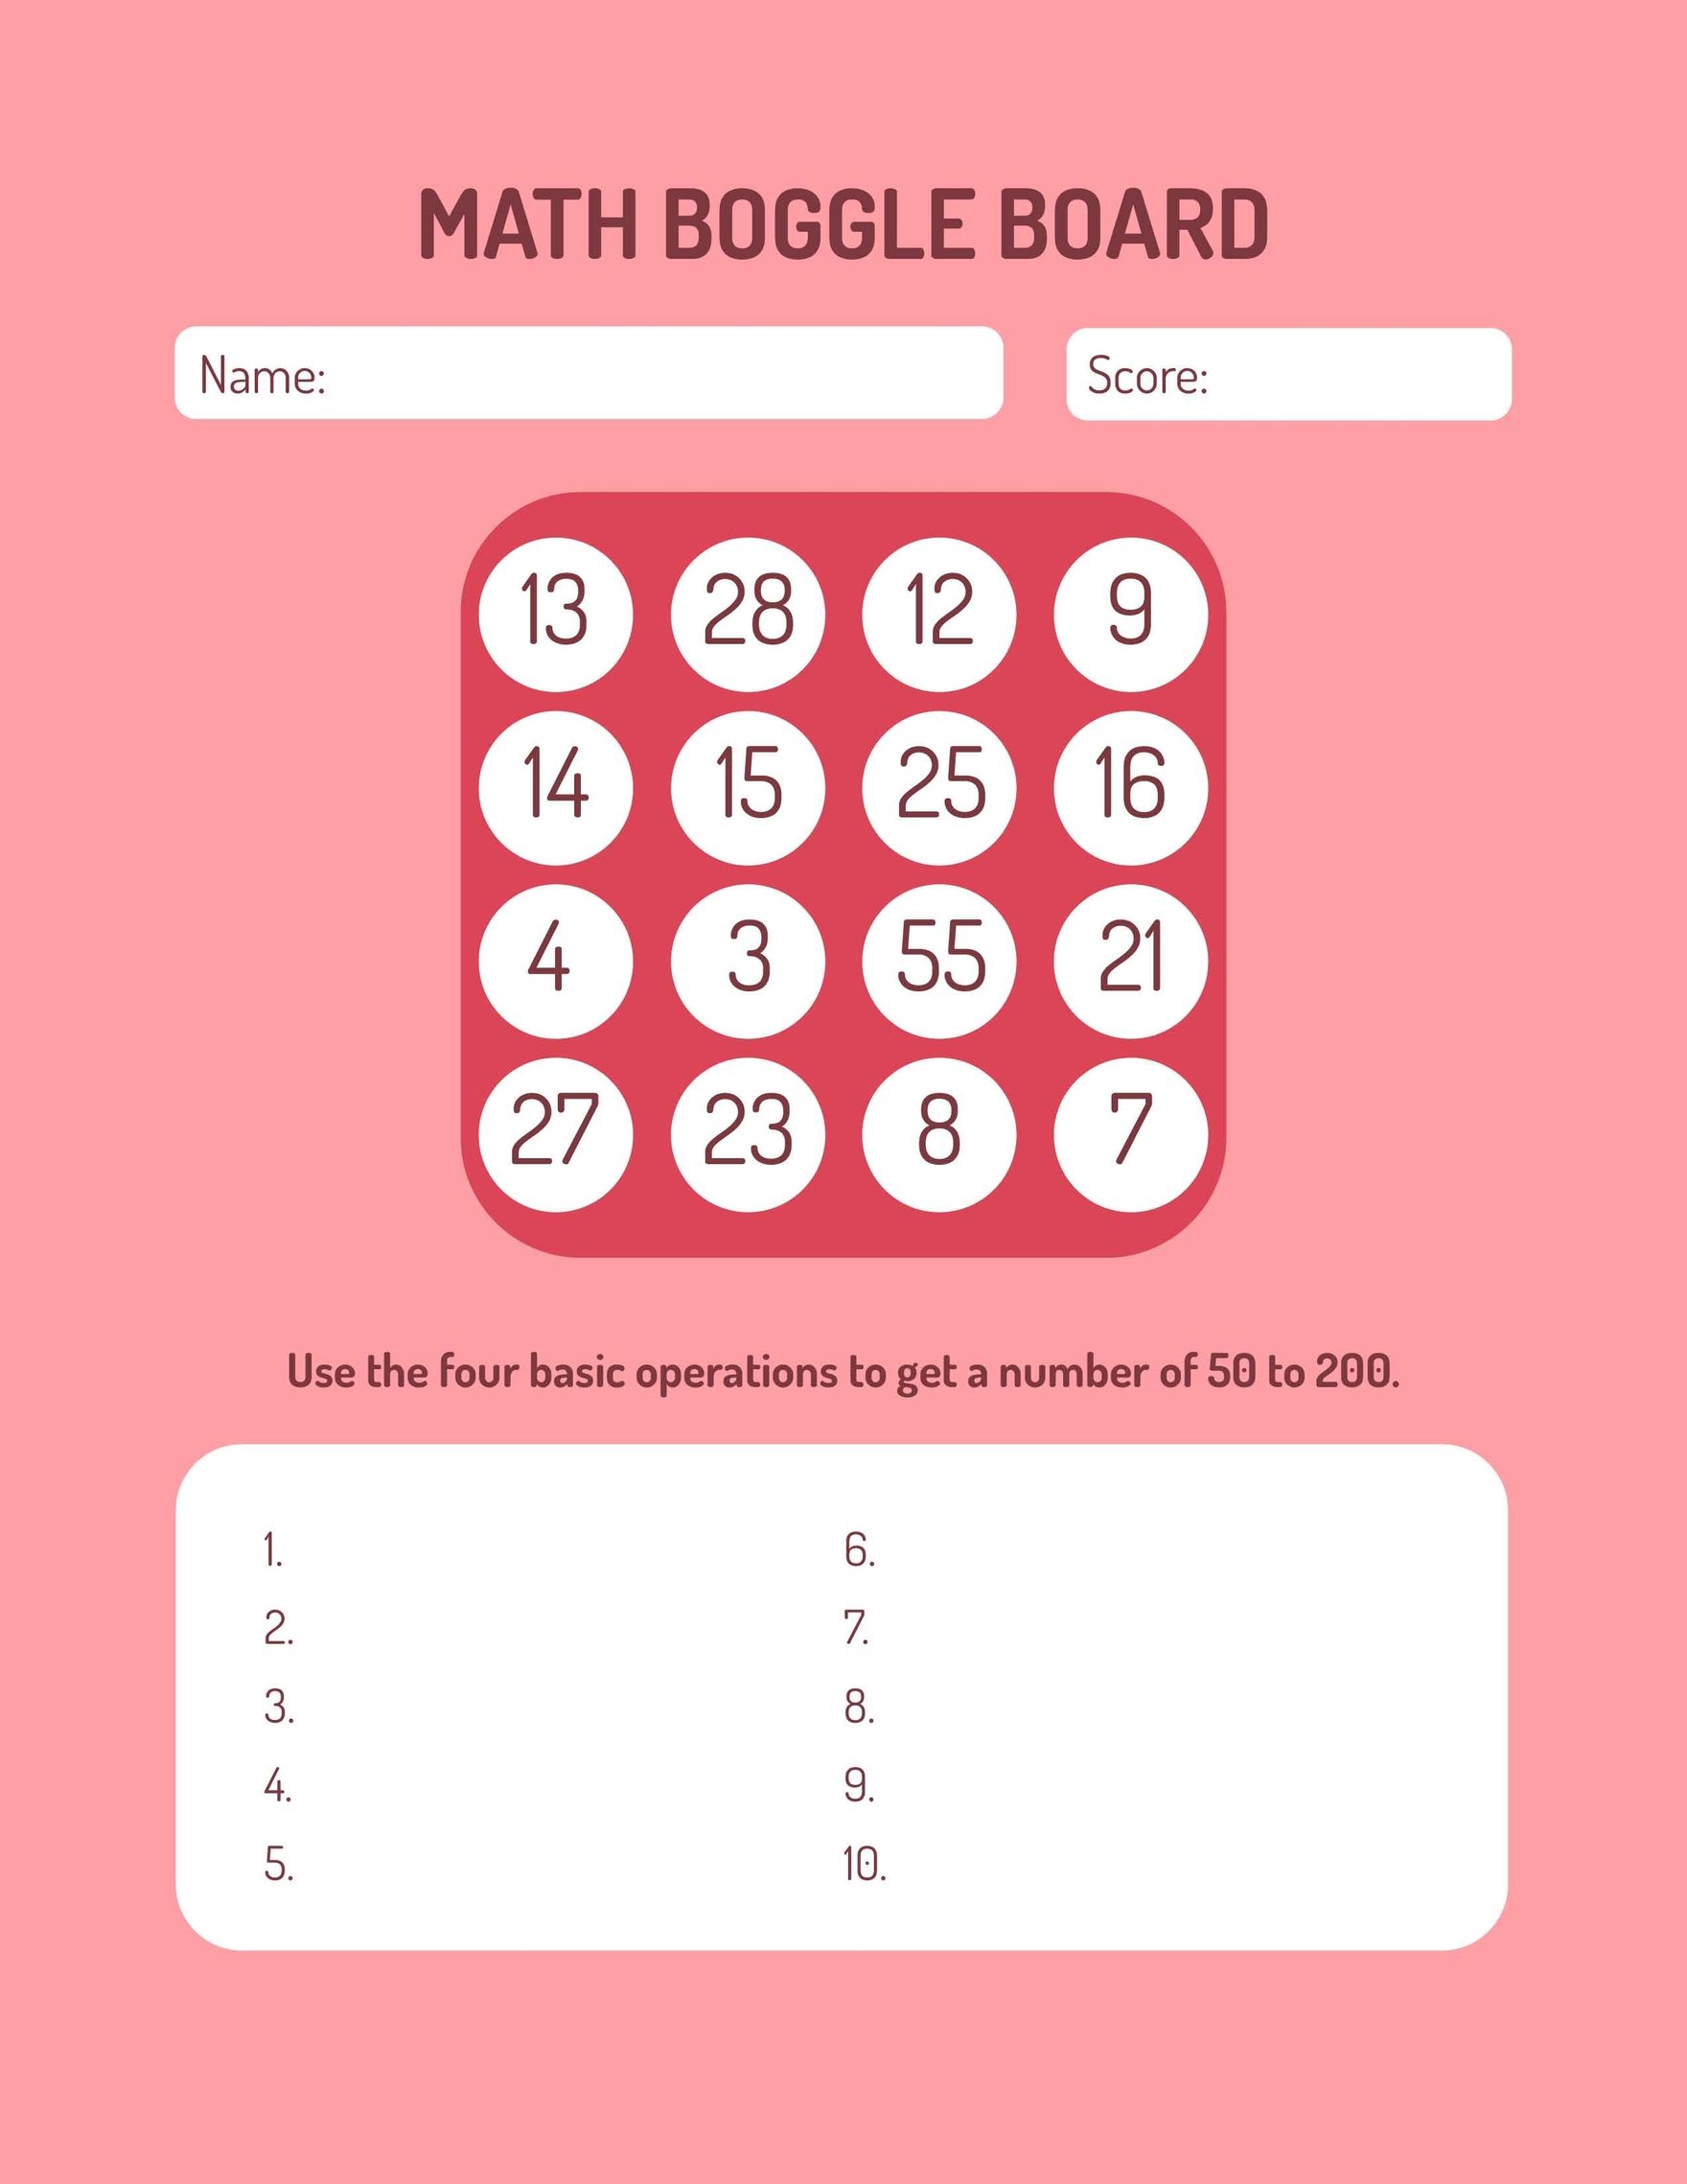 Math Boggle Board Template in Word, Google Docs, PDF, Apple Pages